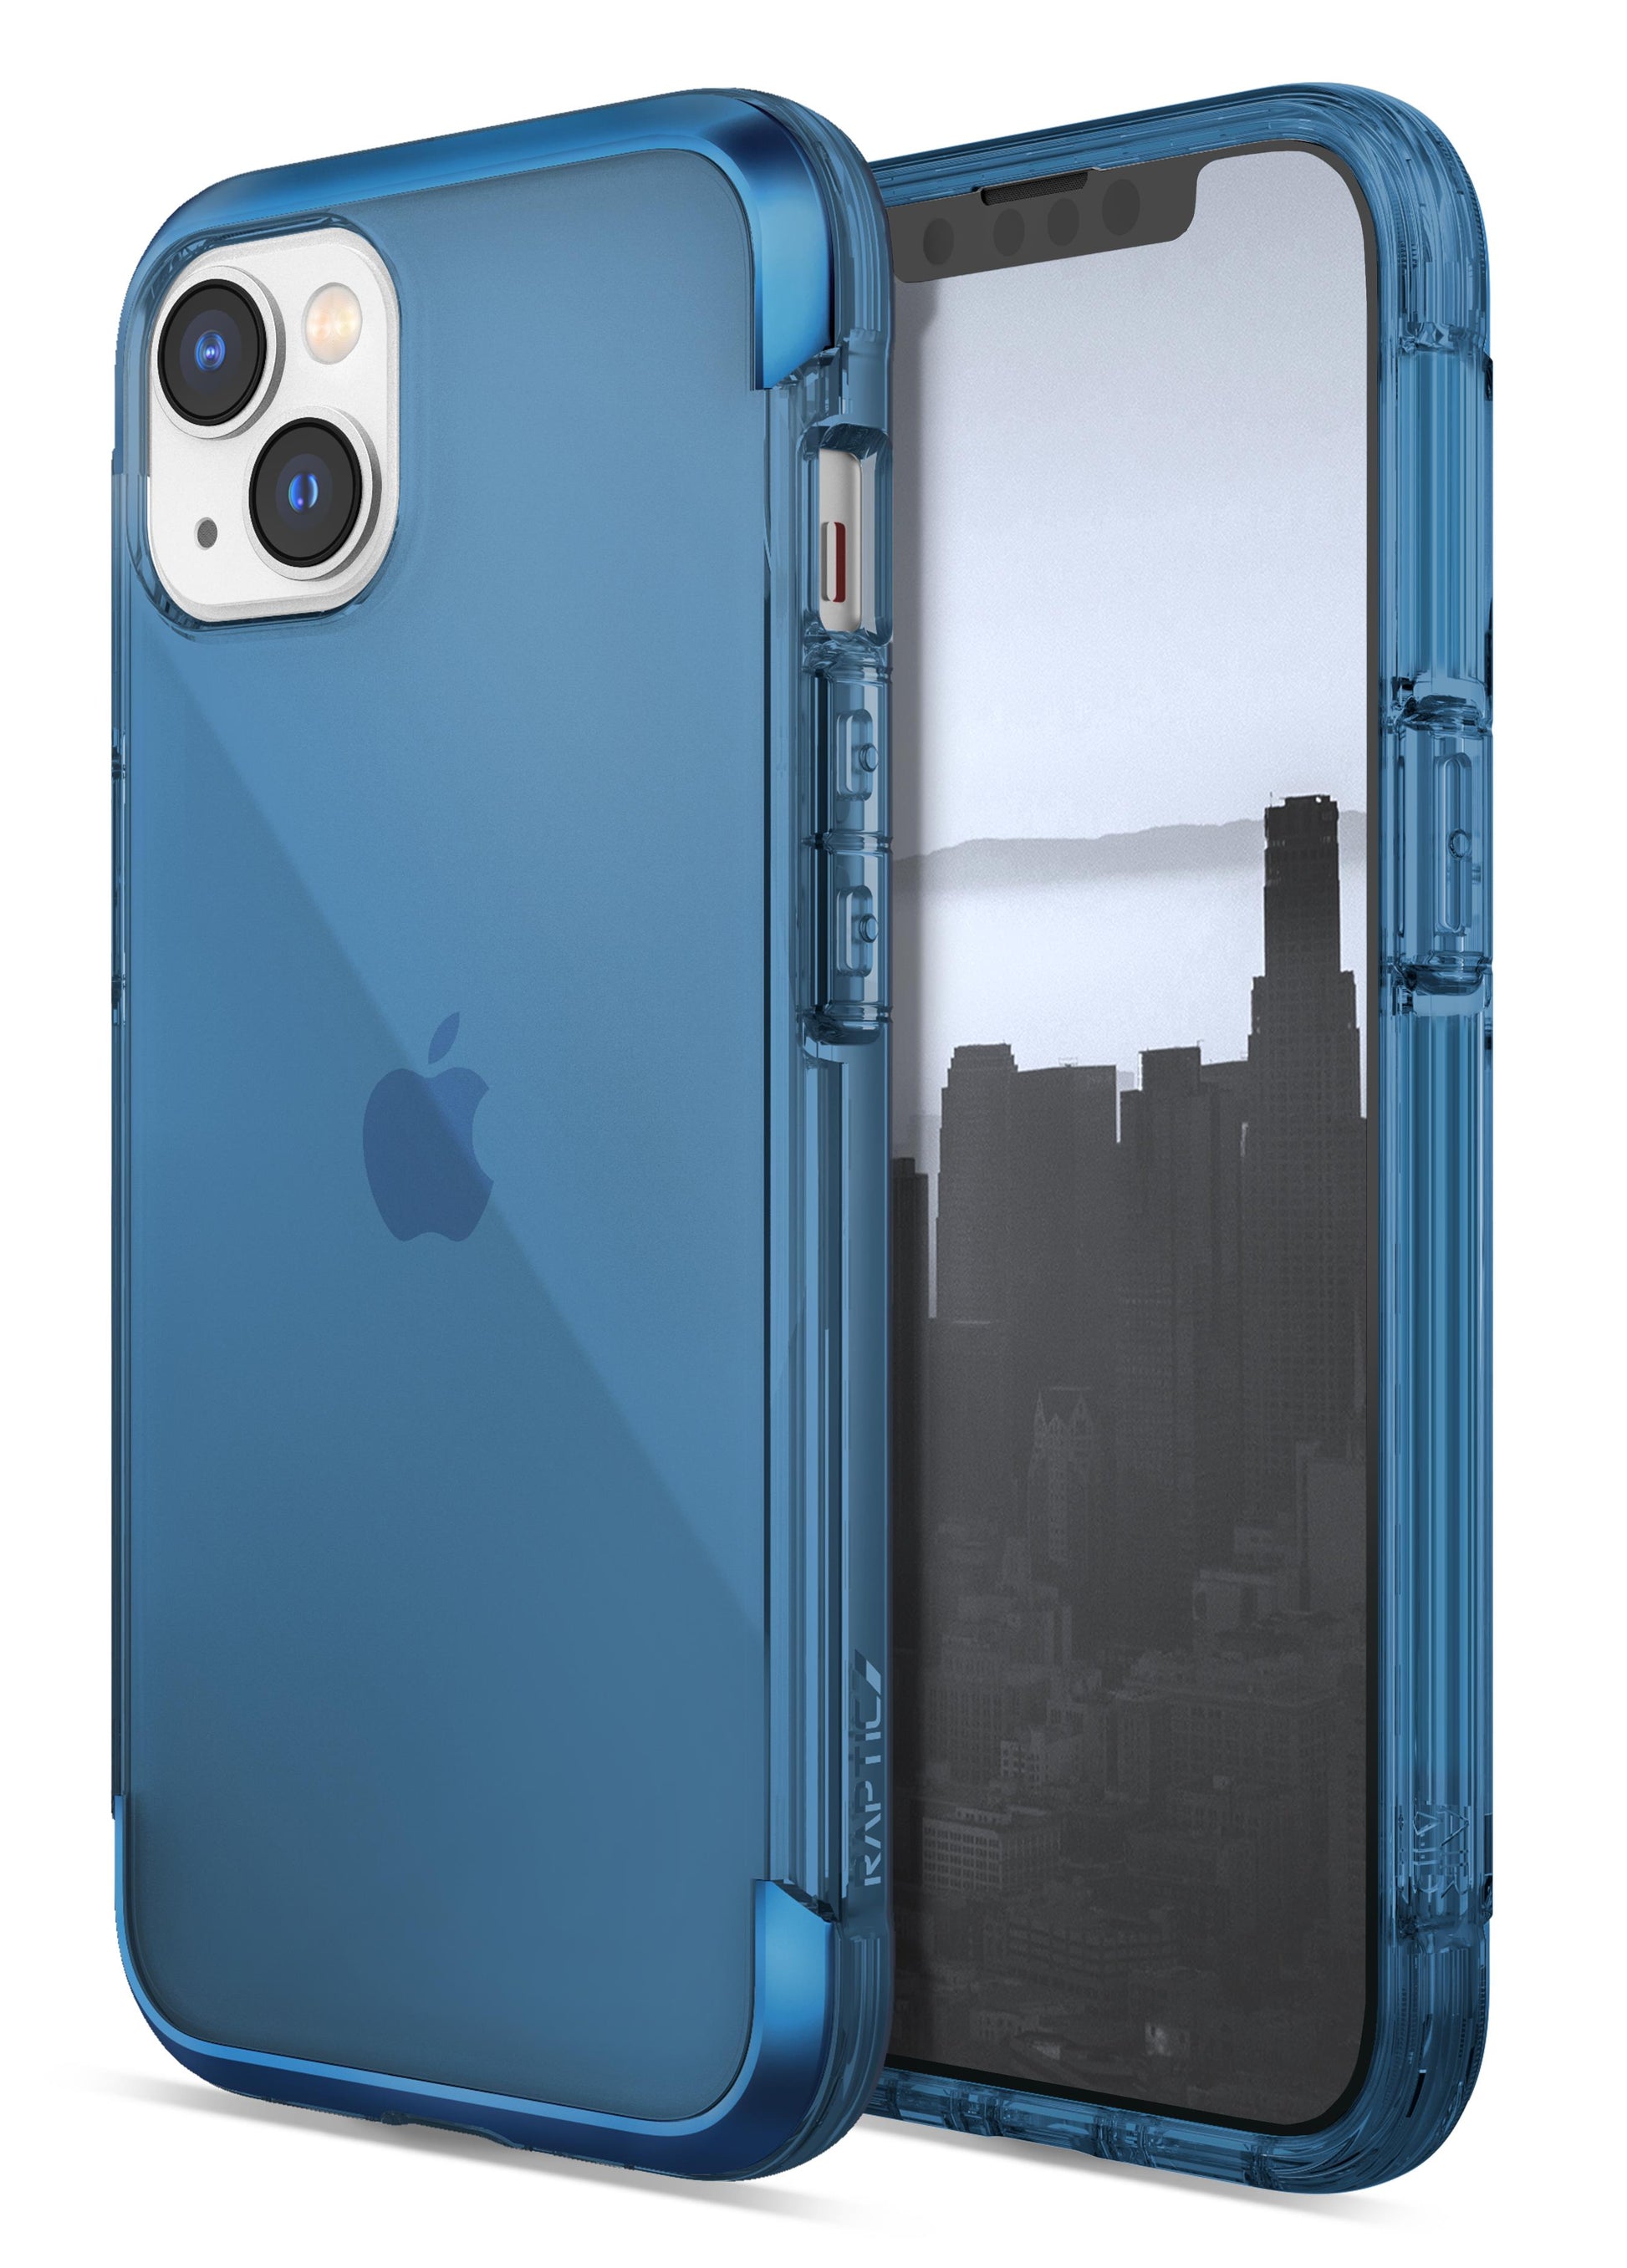 The aeon - iPhone 14 Pro Max Air Case - Raptic Air by Raptic is shown in blue.